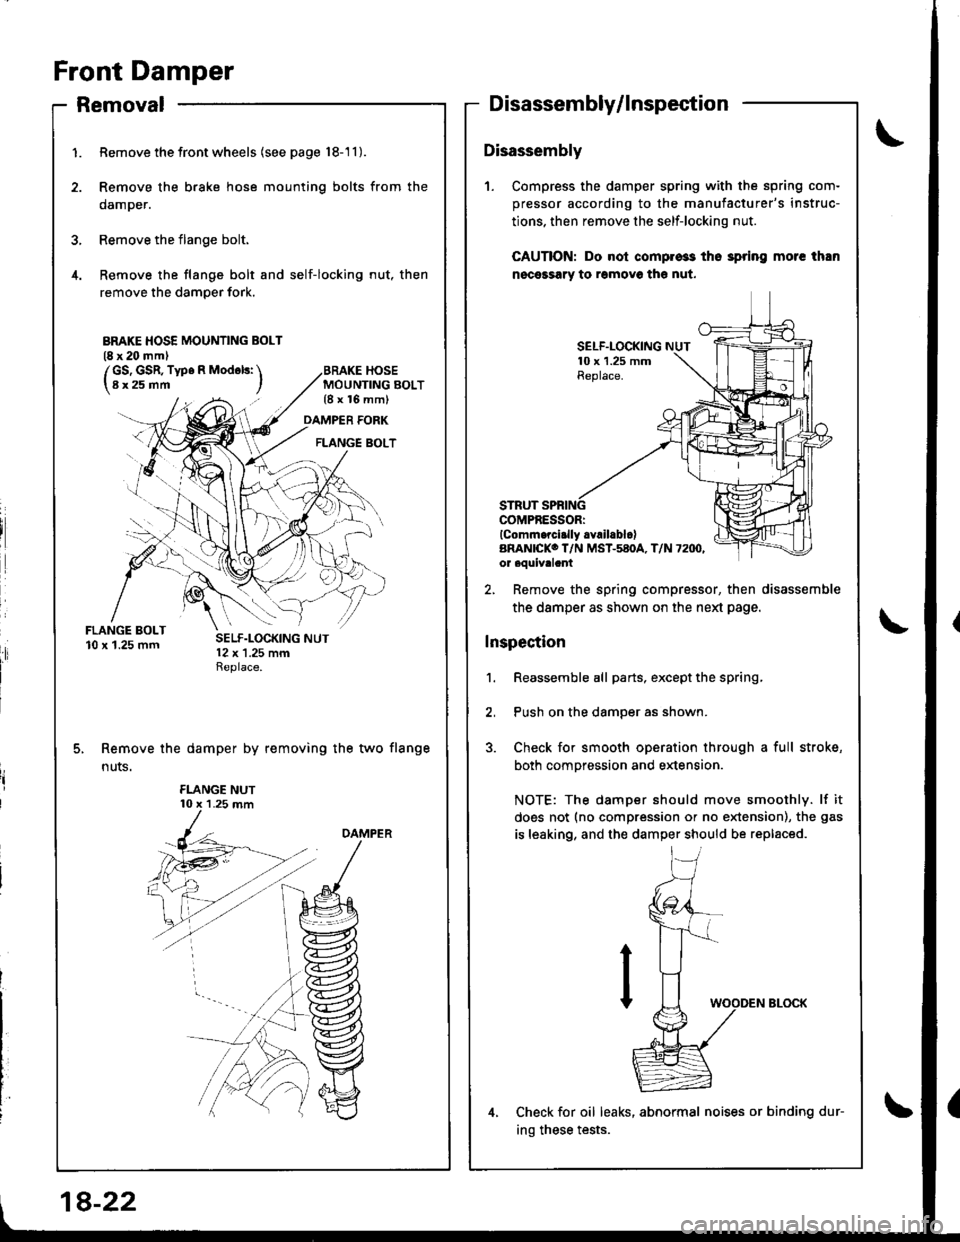 HONDA INTEGRA 1998 4.G Workshop Manual Front Damper
FLANGE BOLT10 x1.25 mm
1.
4.
Removal
Remove thefrontwheels (see page 18-11).
Remove the brake hose mounting bolts from the
damper.
Remove the flange bolt.
Remove the flange bolt and sel